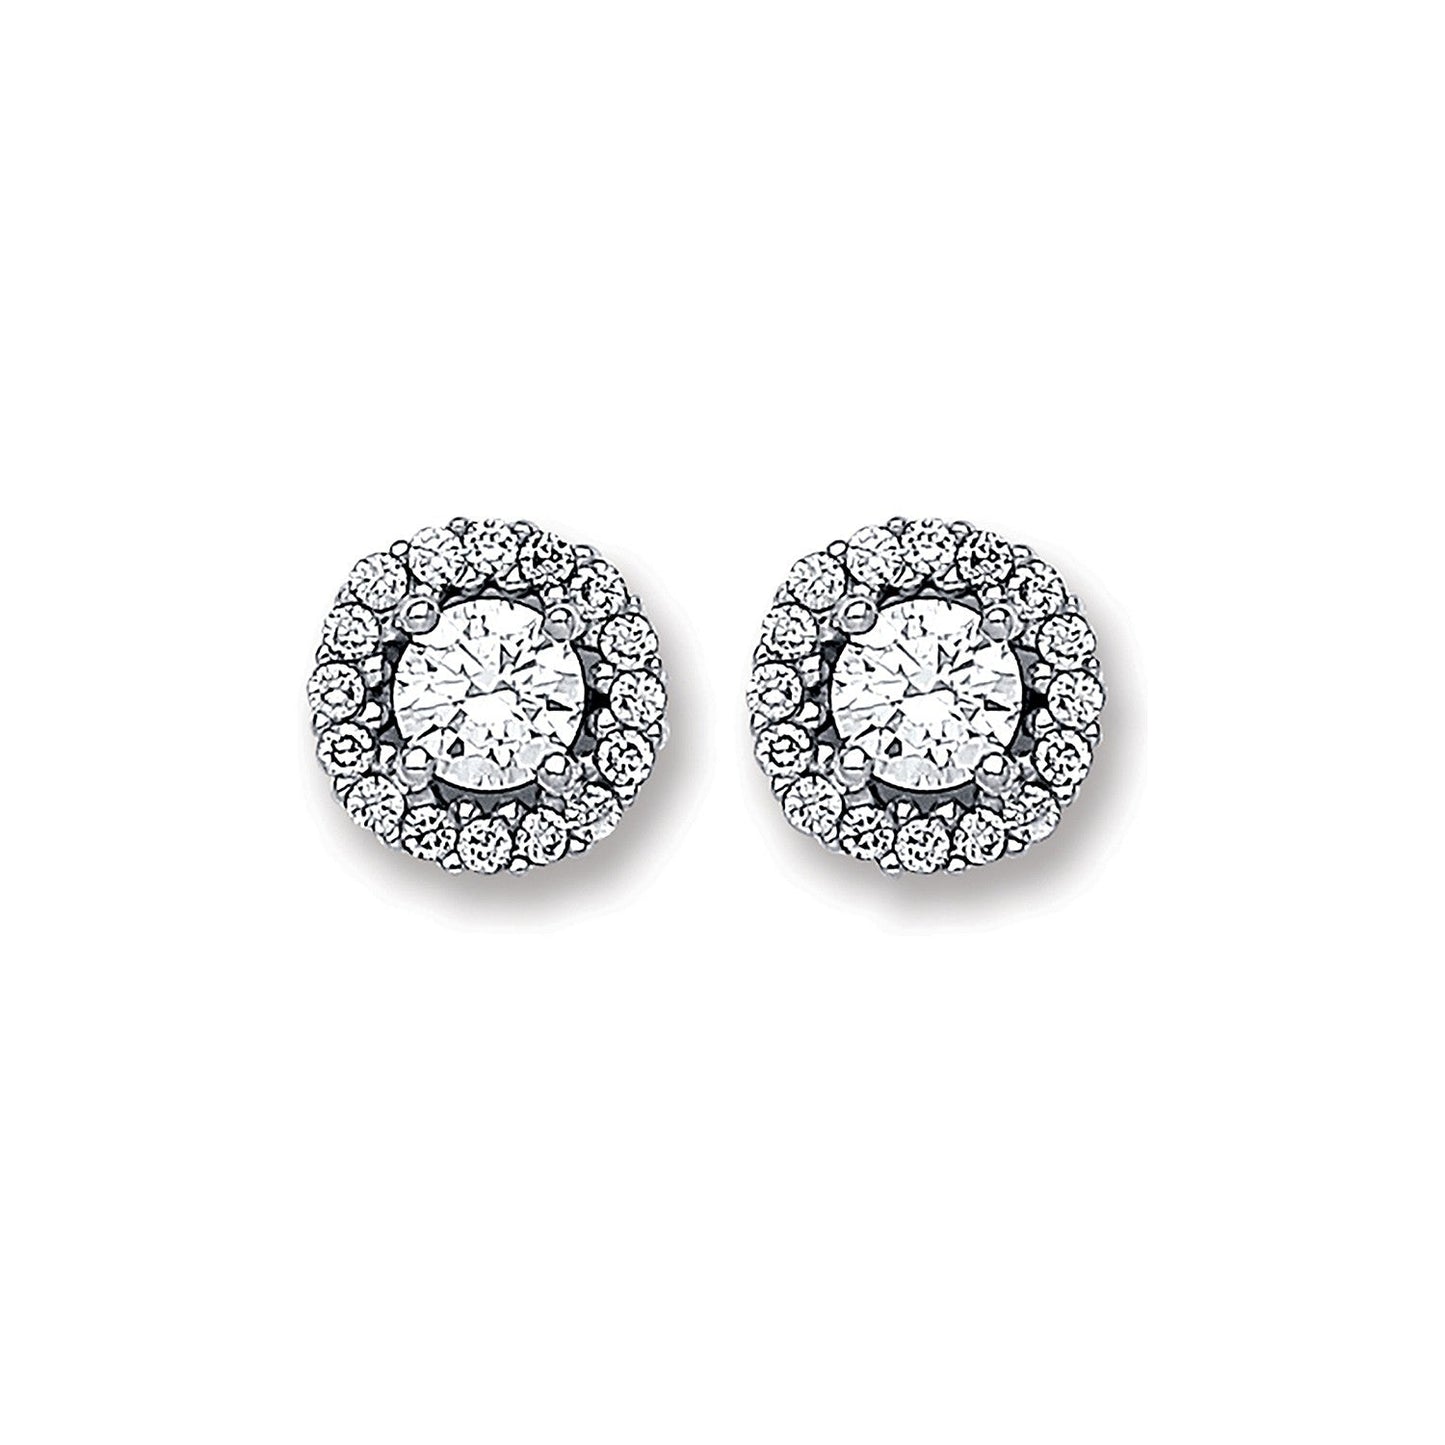 9ct White Gold Cz Cluster Studs 7.5mm - FJewellery